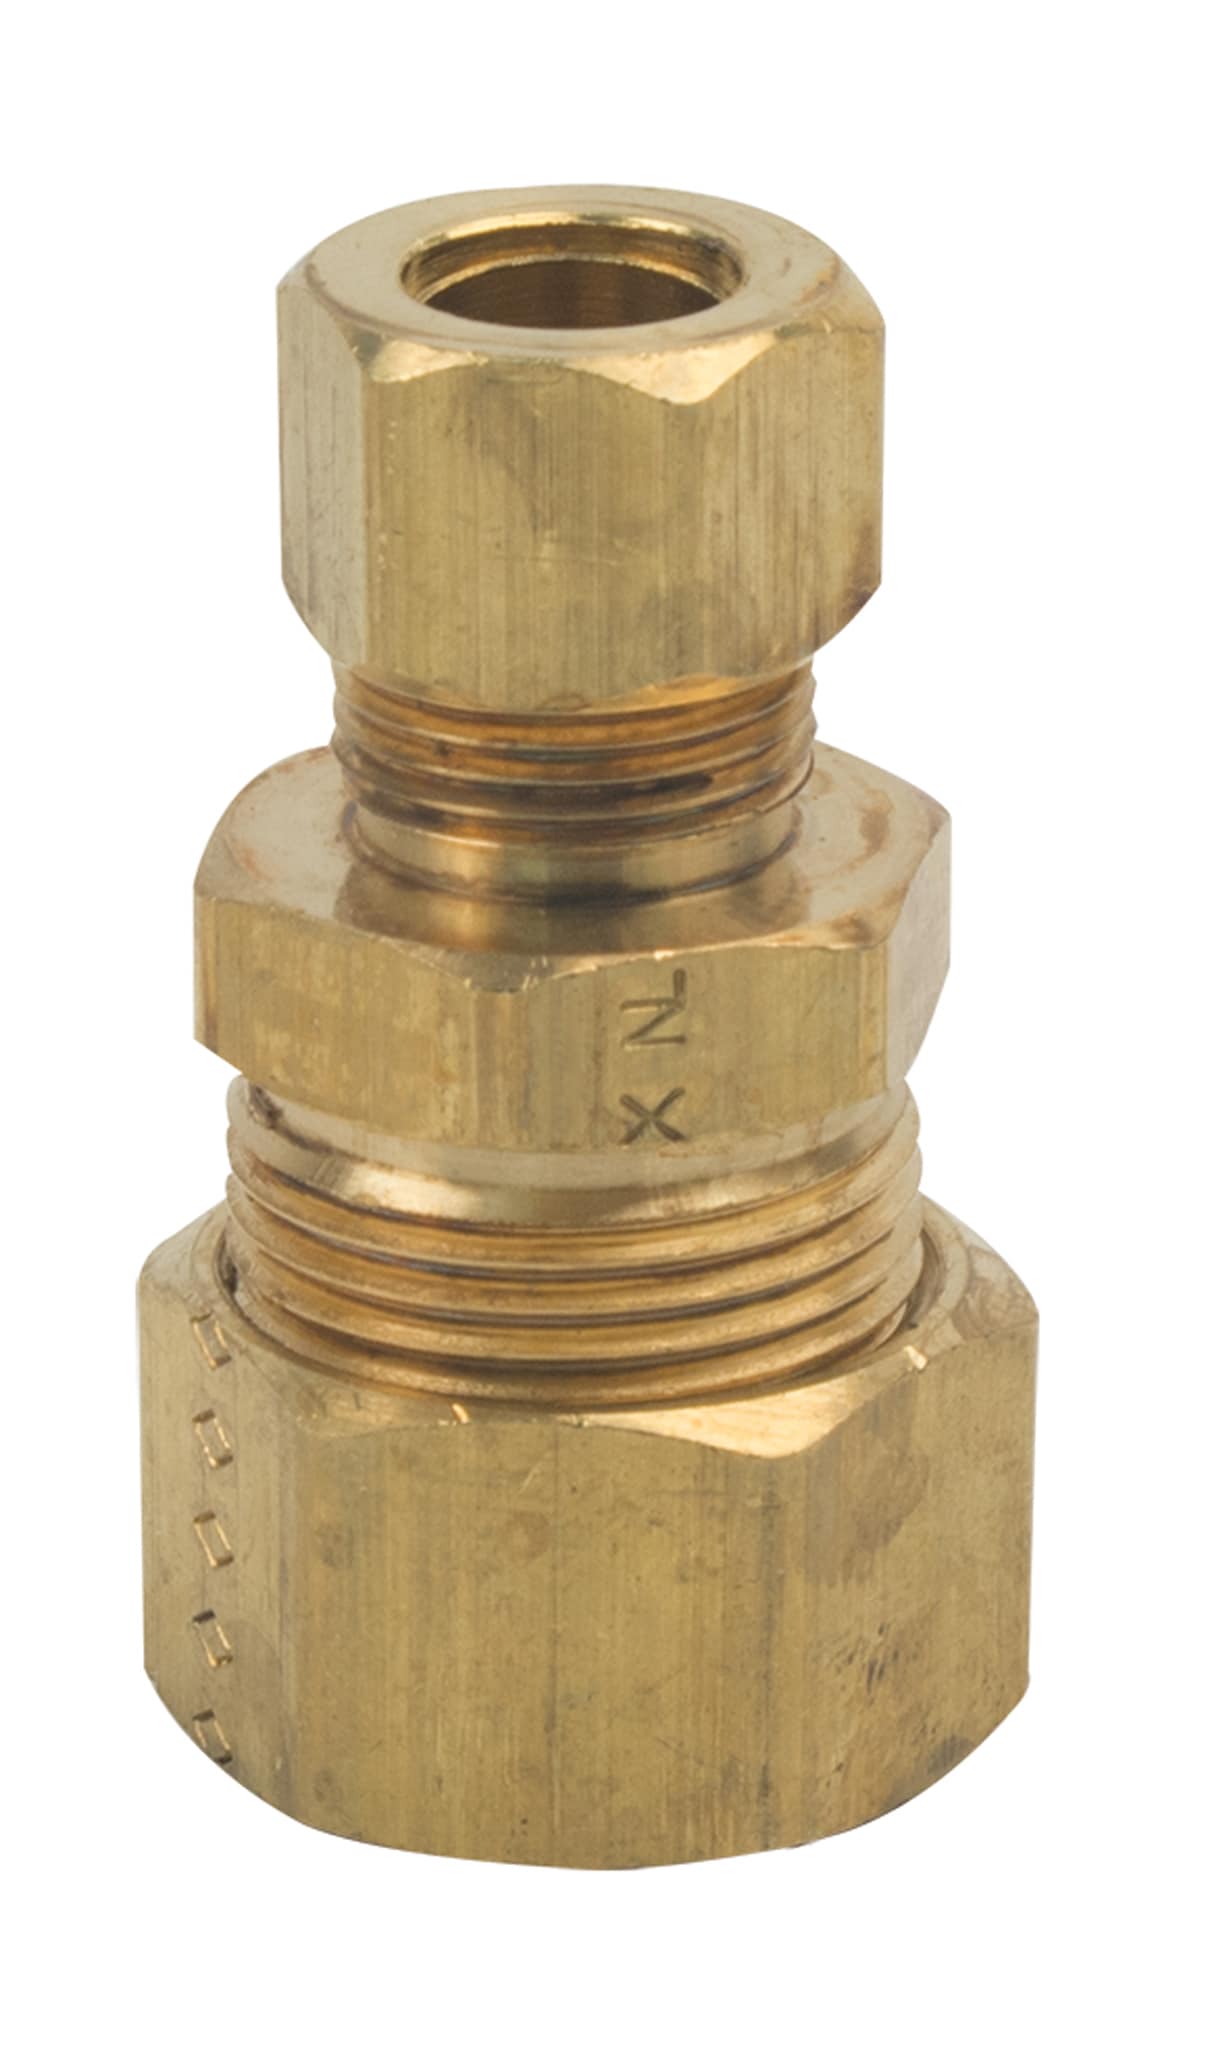 BrassCraft 3/8-in x 3/8-in Compression Elbow Fitting in the Brass